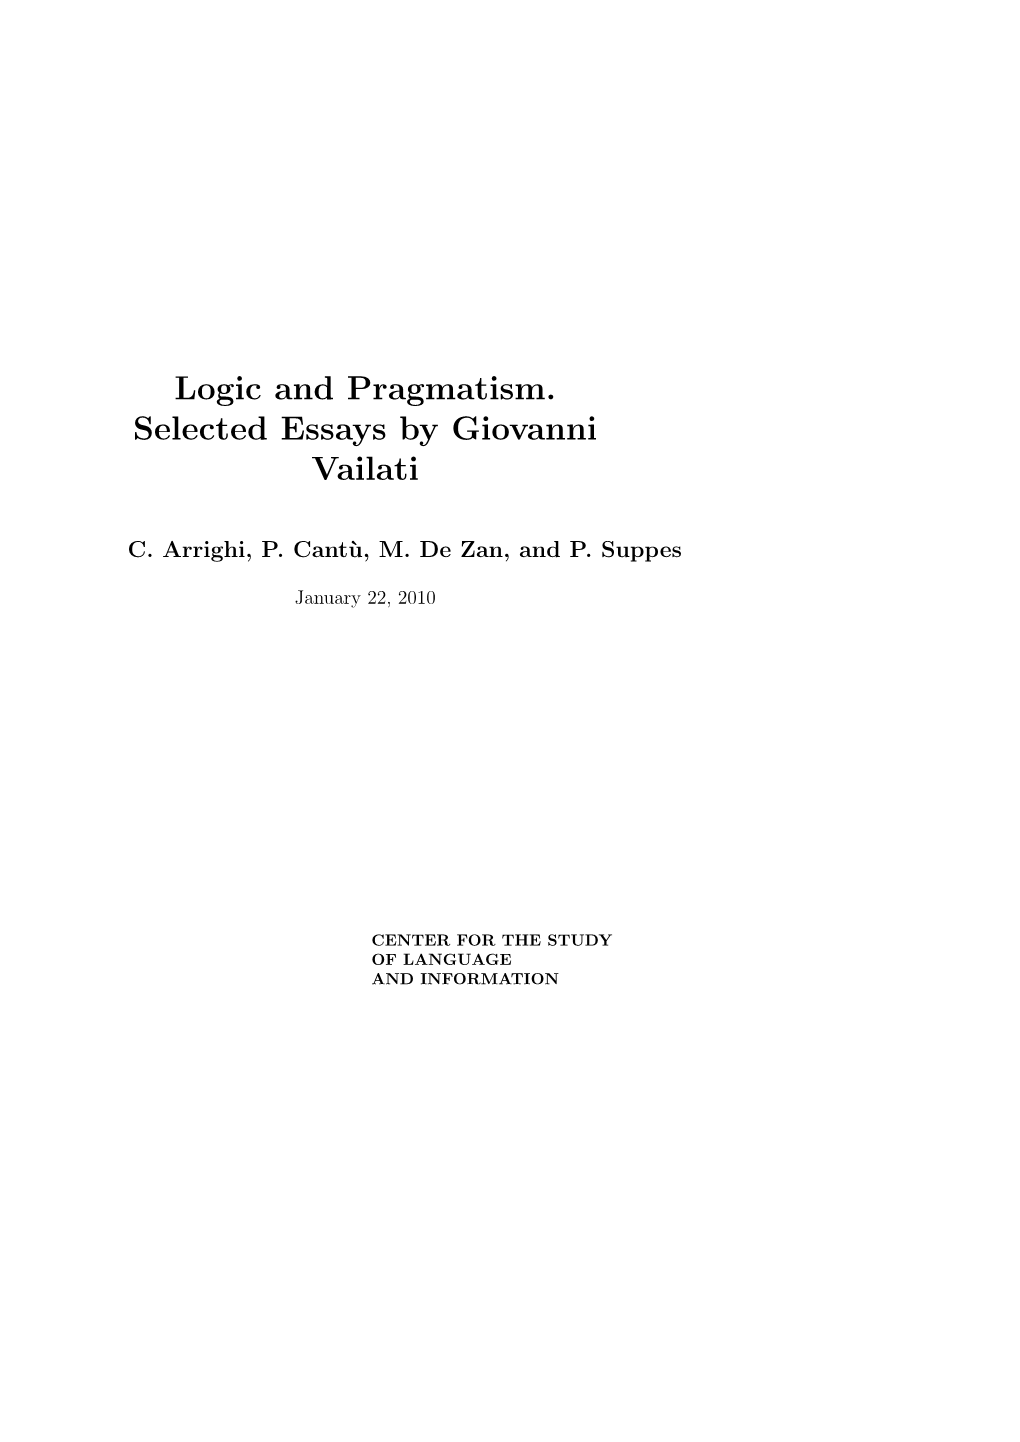 Logic and Pragmatism. Selected Essays by Giovanni Vailati